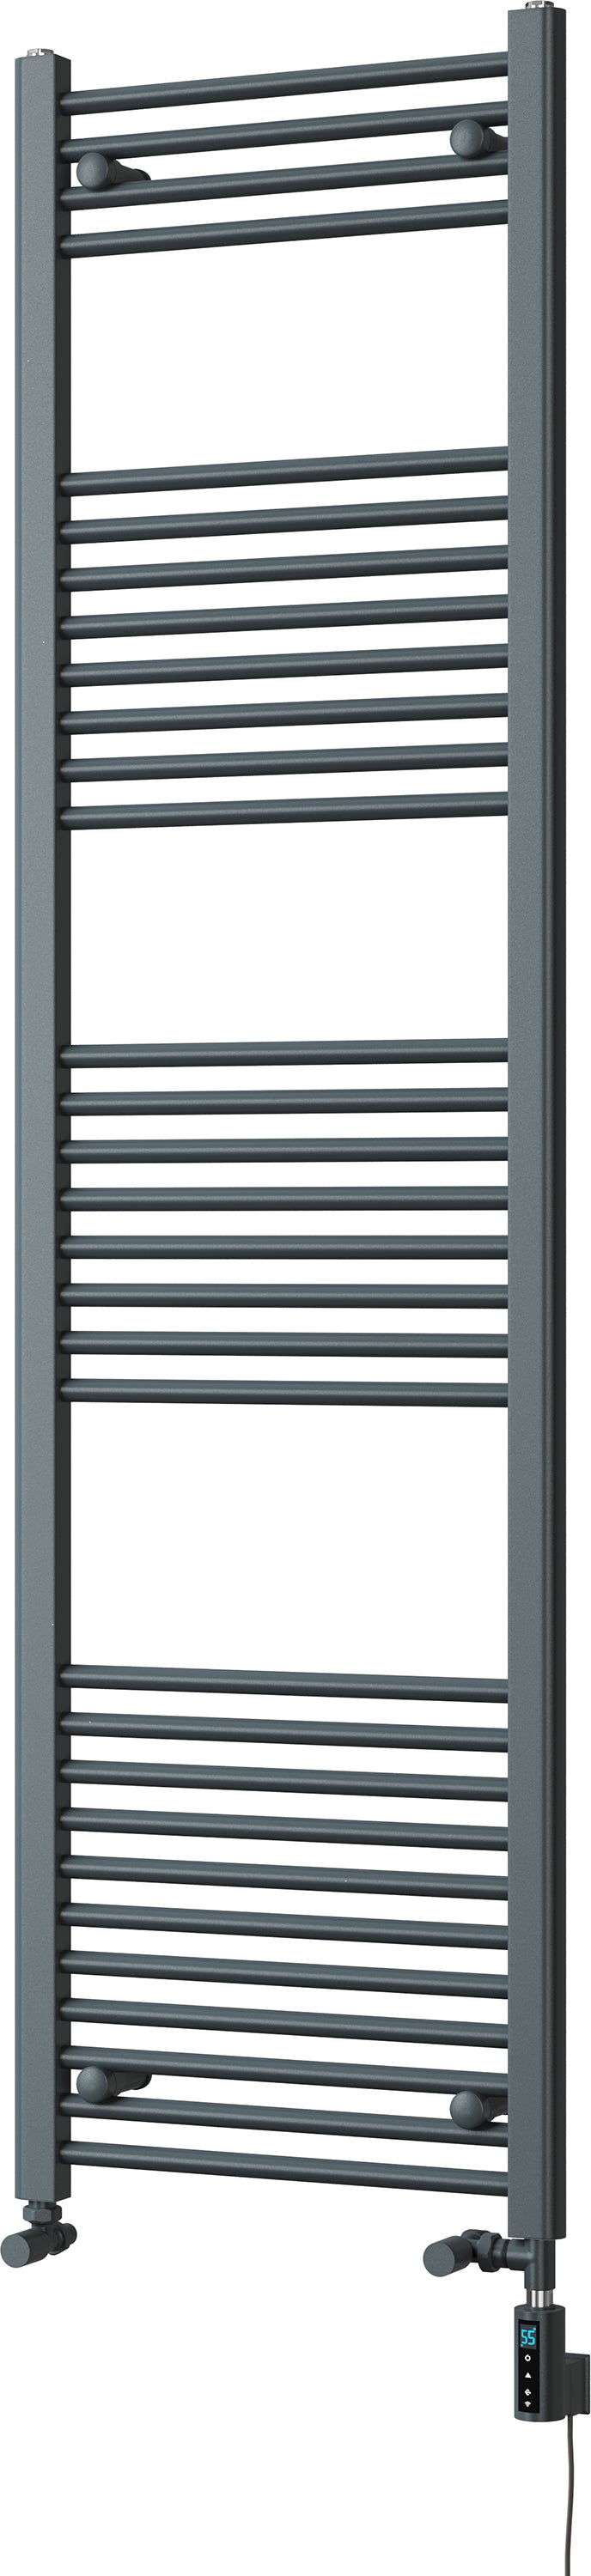 Zennor - Anthracite Dual Fuel Towel Rail  H1800mm x W500mm Thermostatic WIFI - Straight